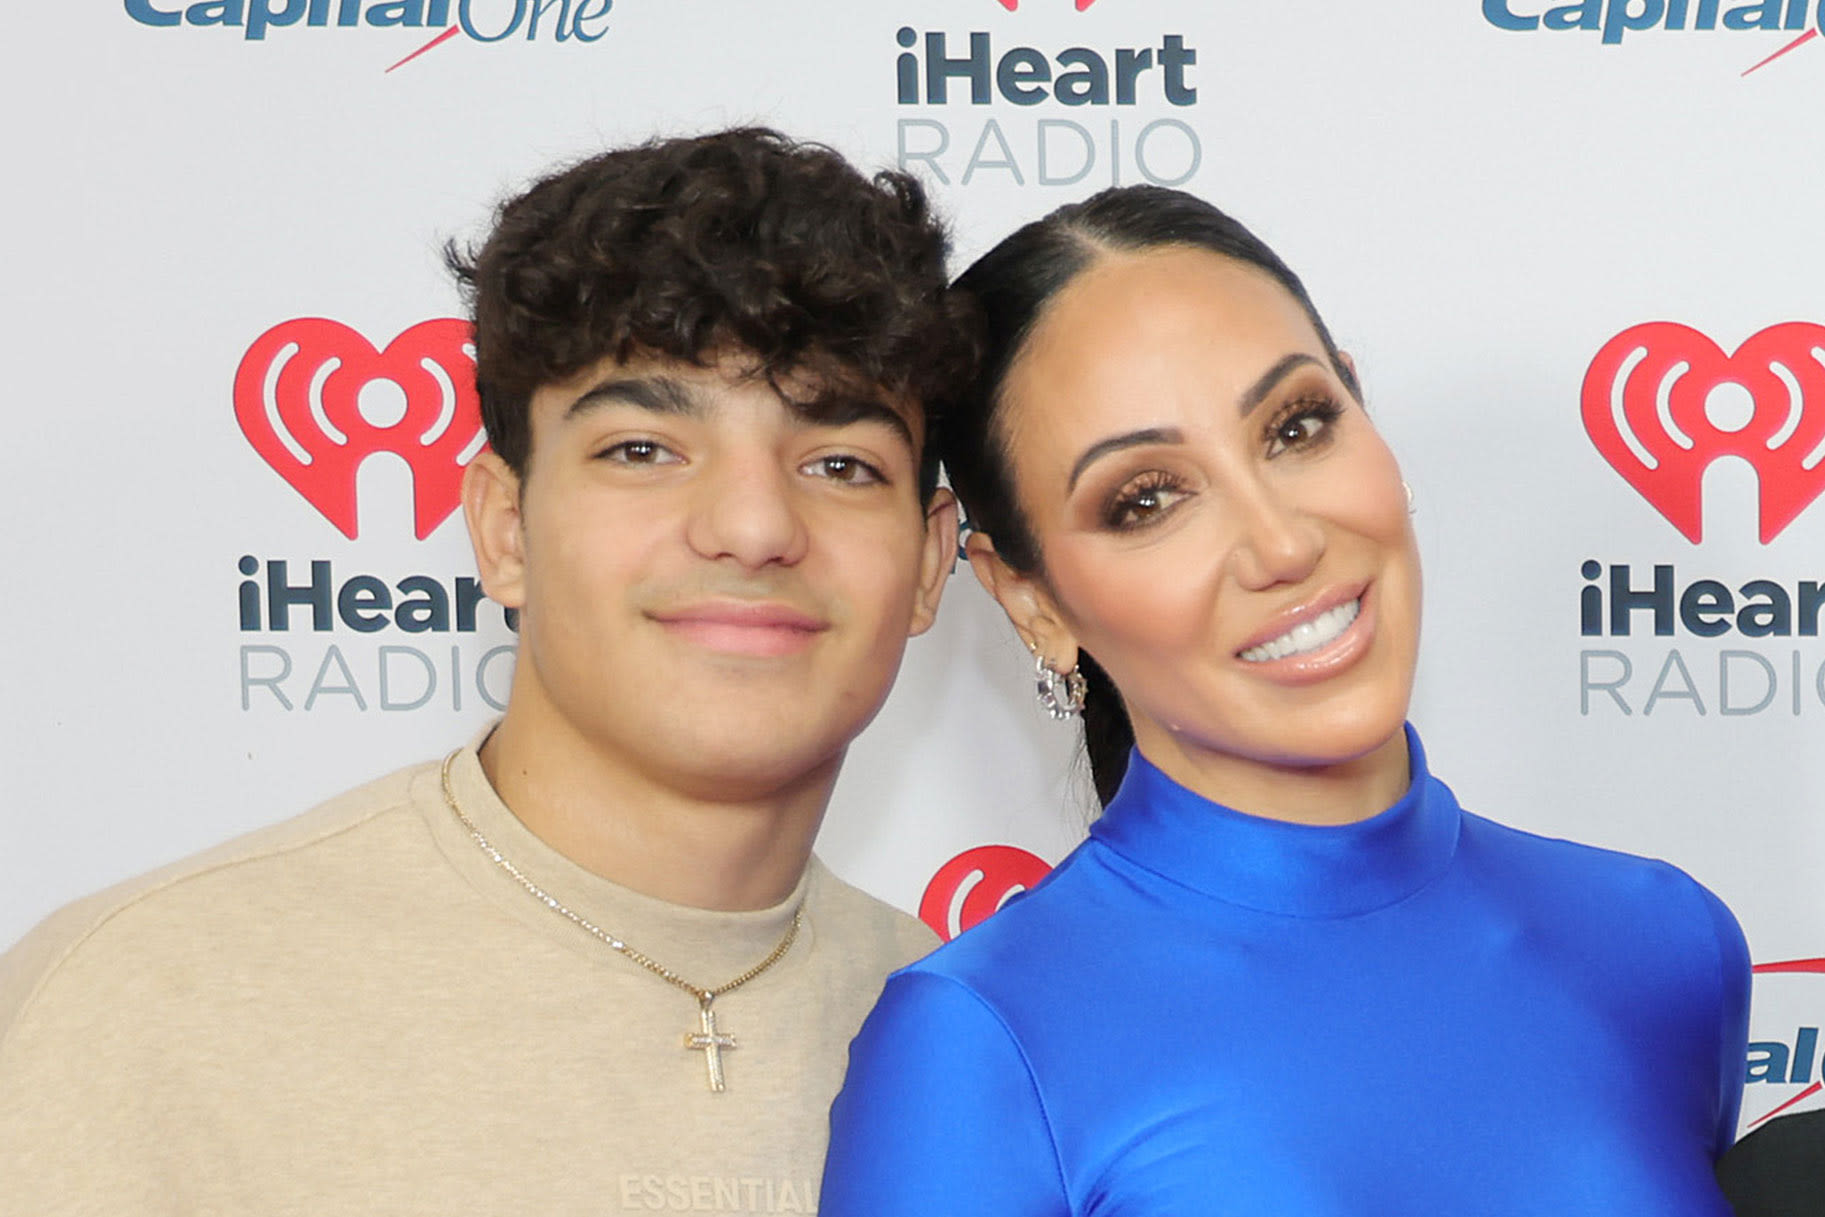 Melissa Gorga Reveals Her Son Gino Just Launched a Clothing Line: "So Proud!" | Bravo TV Official Site